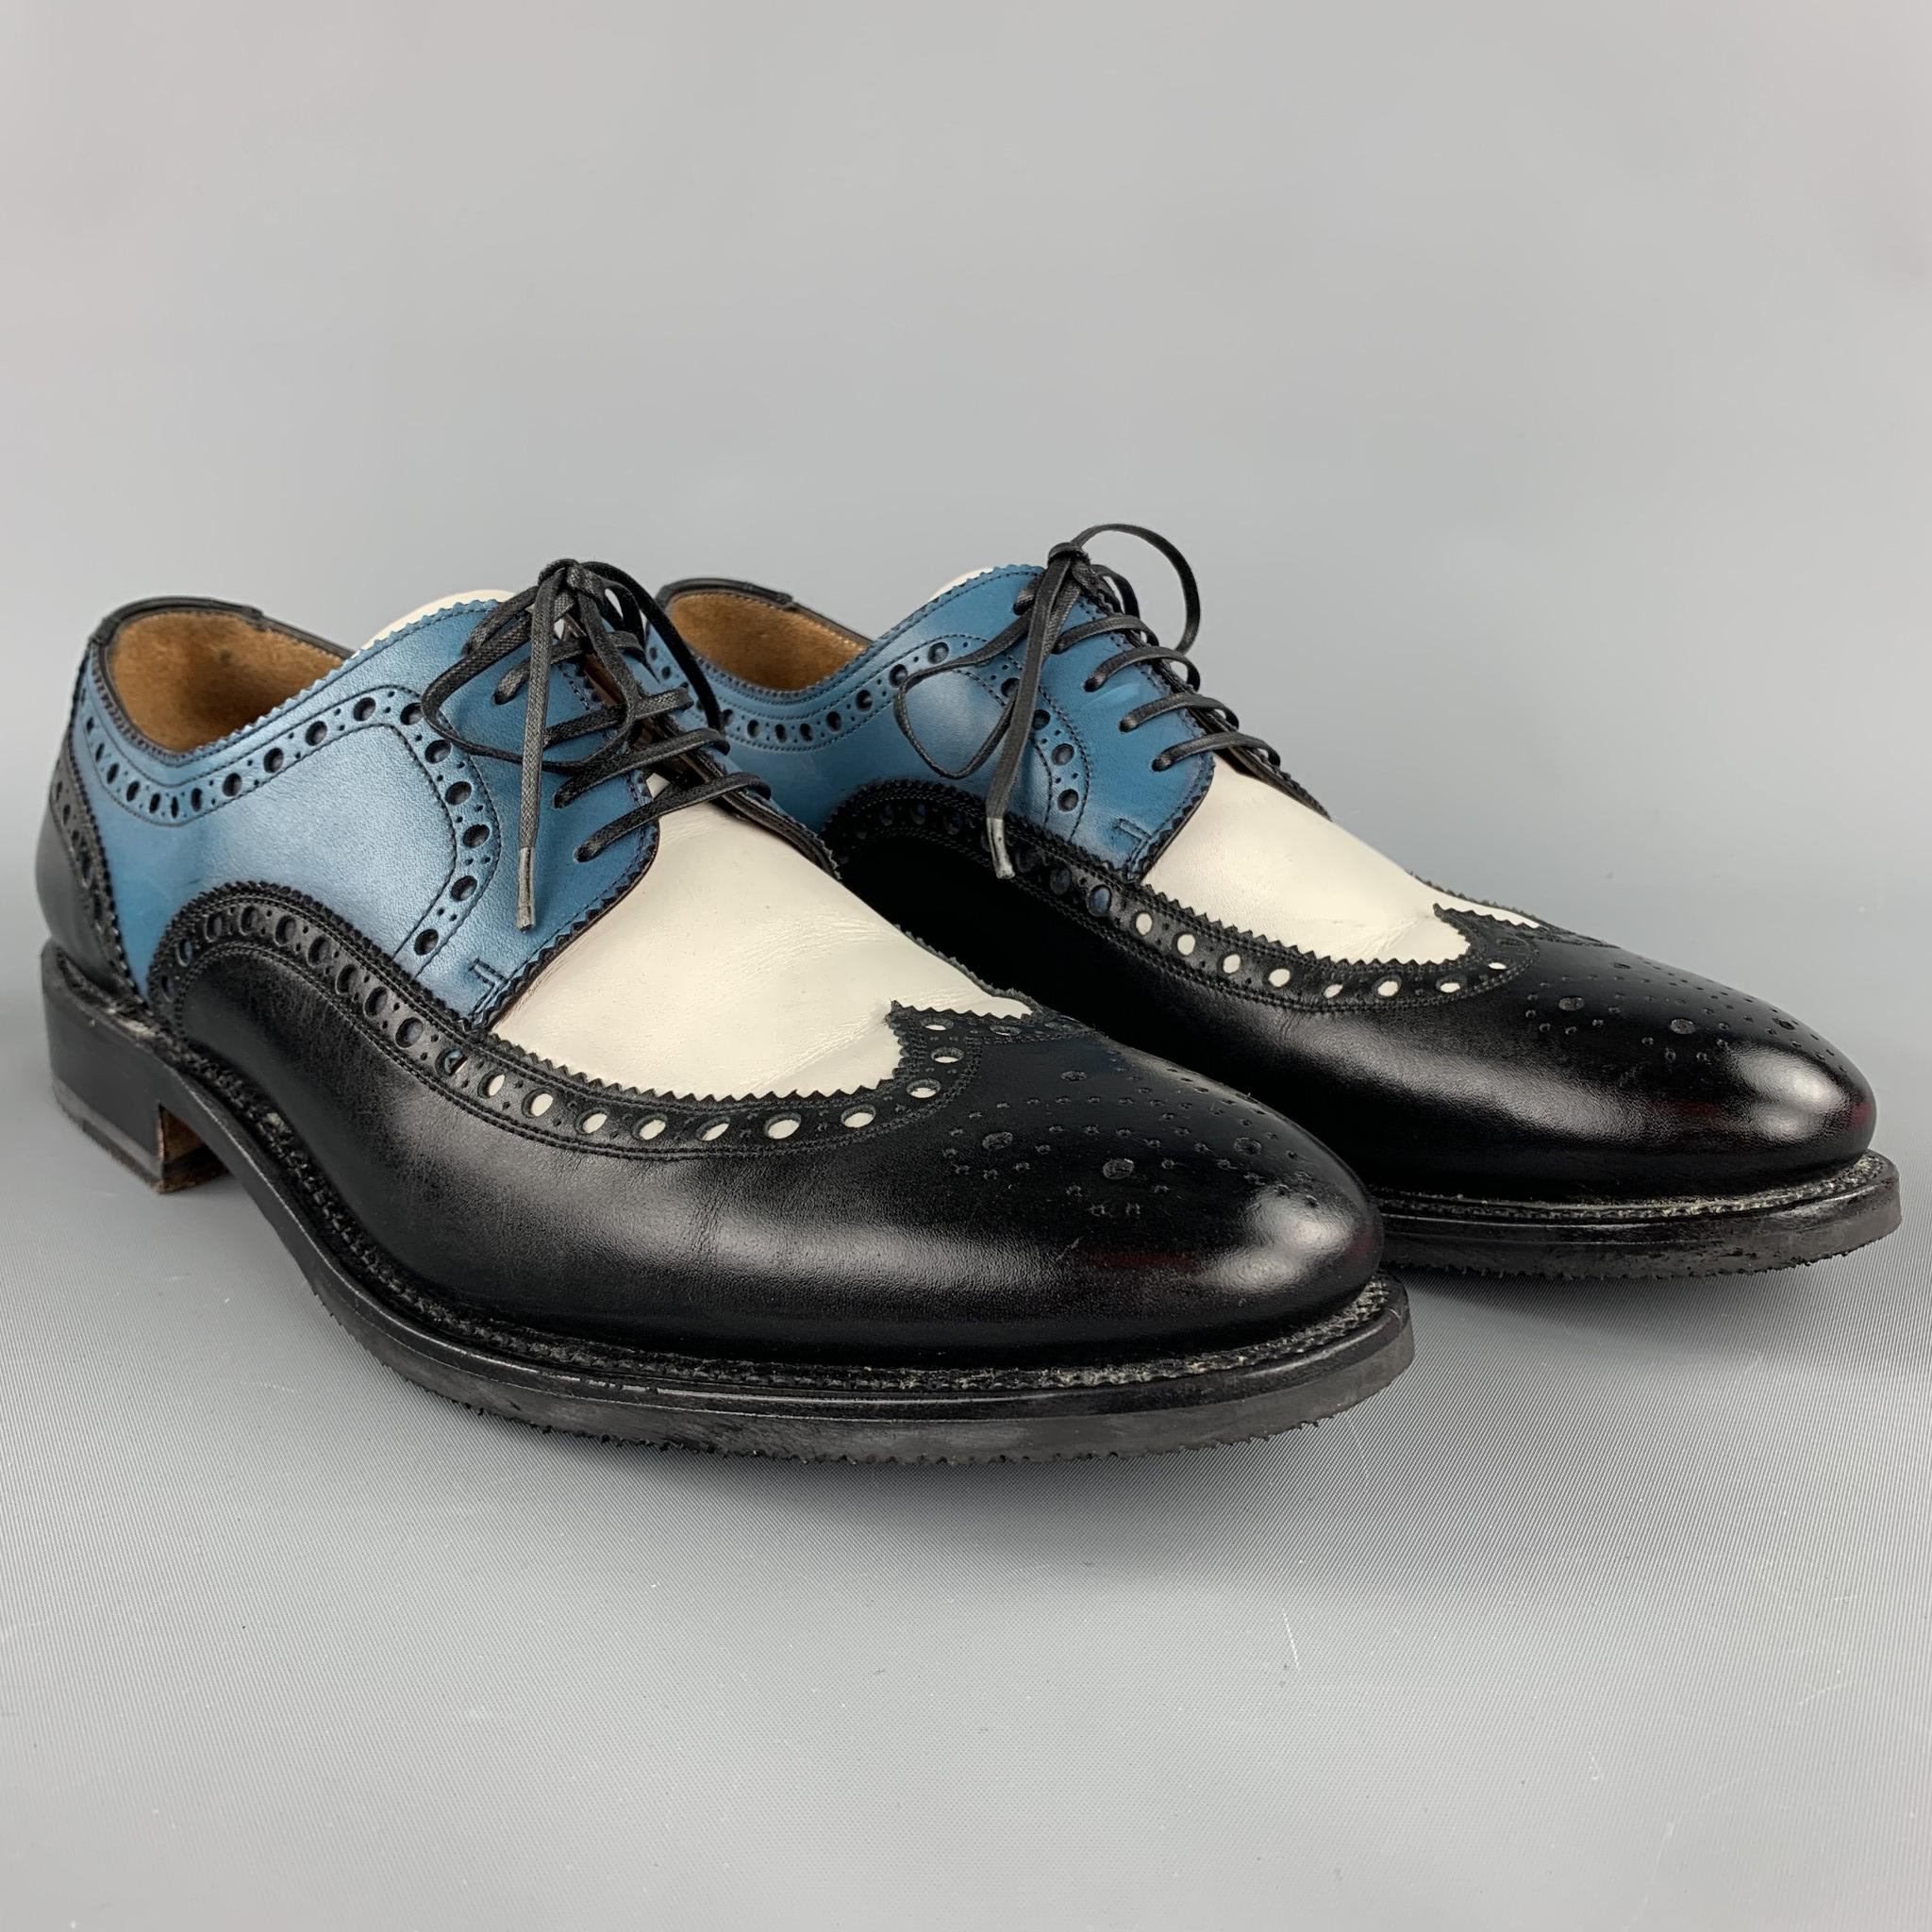 SALVATORE FERRAGAMO lace up shoes comes in a tri-color leather featuring a wingtip design and a wooden sole. Made in Italy.

Very Good Pre-Owned Condition.
Marked: 8.5 D
Original Retail Price: $1,150.00

Outsole:

12 in. x 4 in. 

